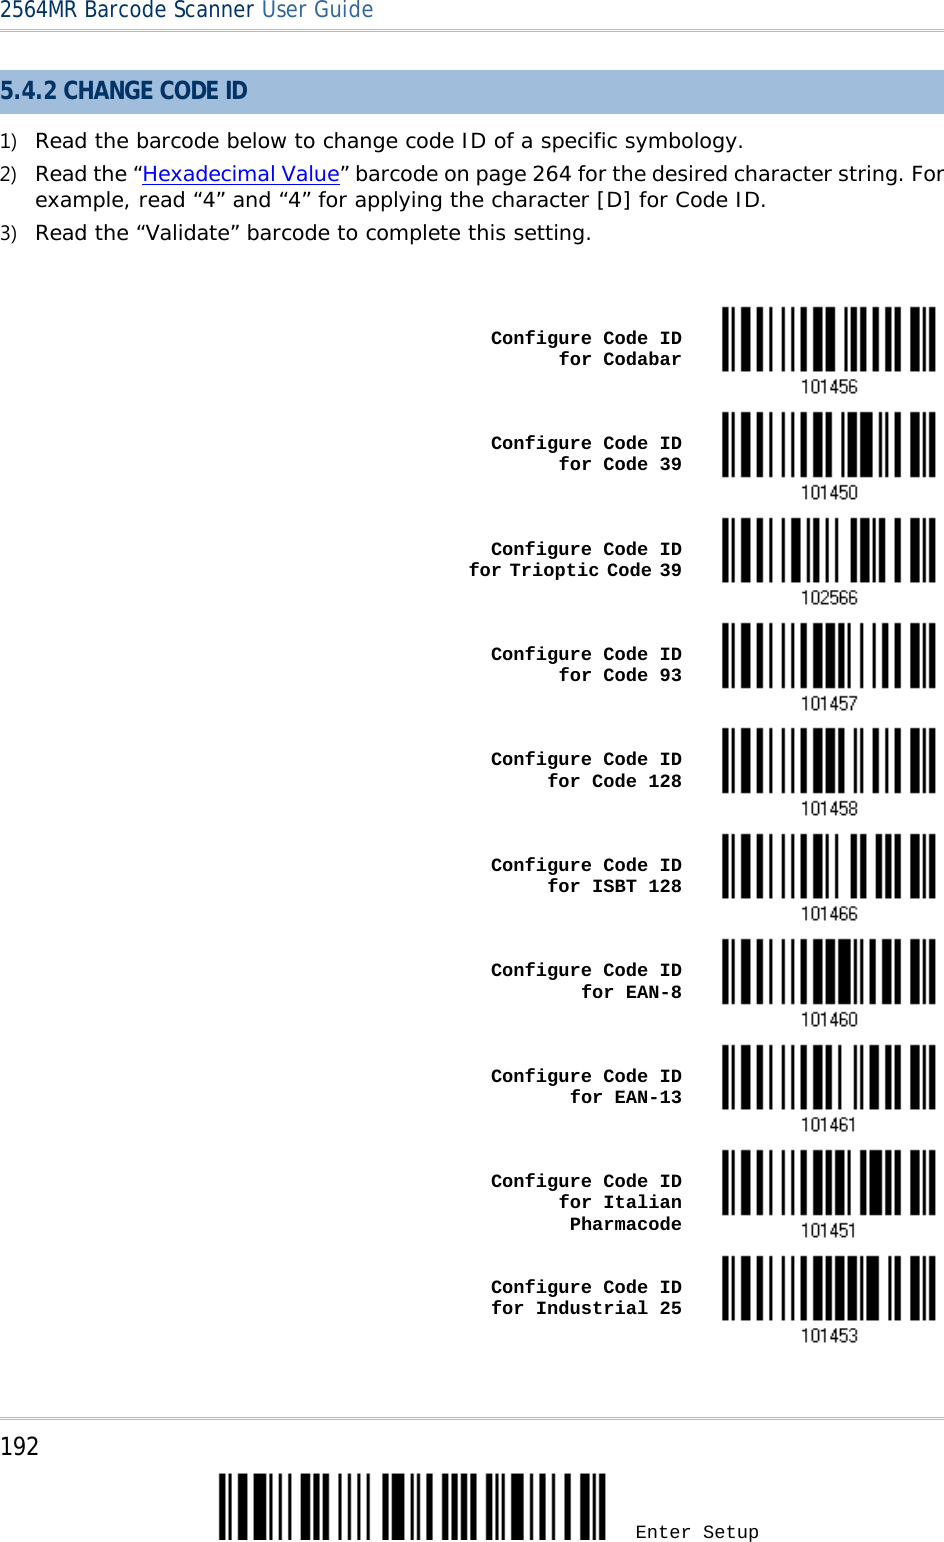 2564MR Barcode Scanner User Guide  5.4.2 CHANGE CODE ID 1) Read the barcode below to change code ID of a specific symbology. 2) Read the “Hexadecimal Value” barcode on page 264 for the desired character string. For example, read “4” and “4” for applying the character [D] for Code ID. 3) Read the “Validate” barcode to complete this setting.     Configure Code ID for Codabar     Configure Code ID for Code 39     Configure Code ID for Trioptic Code 39      Configure Code ID for Code 93     Configure Code ID for Code 128     Configure Code ID for ISBT 128     Configure Code ID for EAN-8     Configure Code ID for EAN-13     Configure Code ID for Italian Pharmacode     Configure Code ID for Industrial 25   192 Enter Setup 